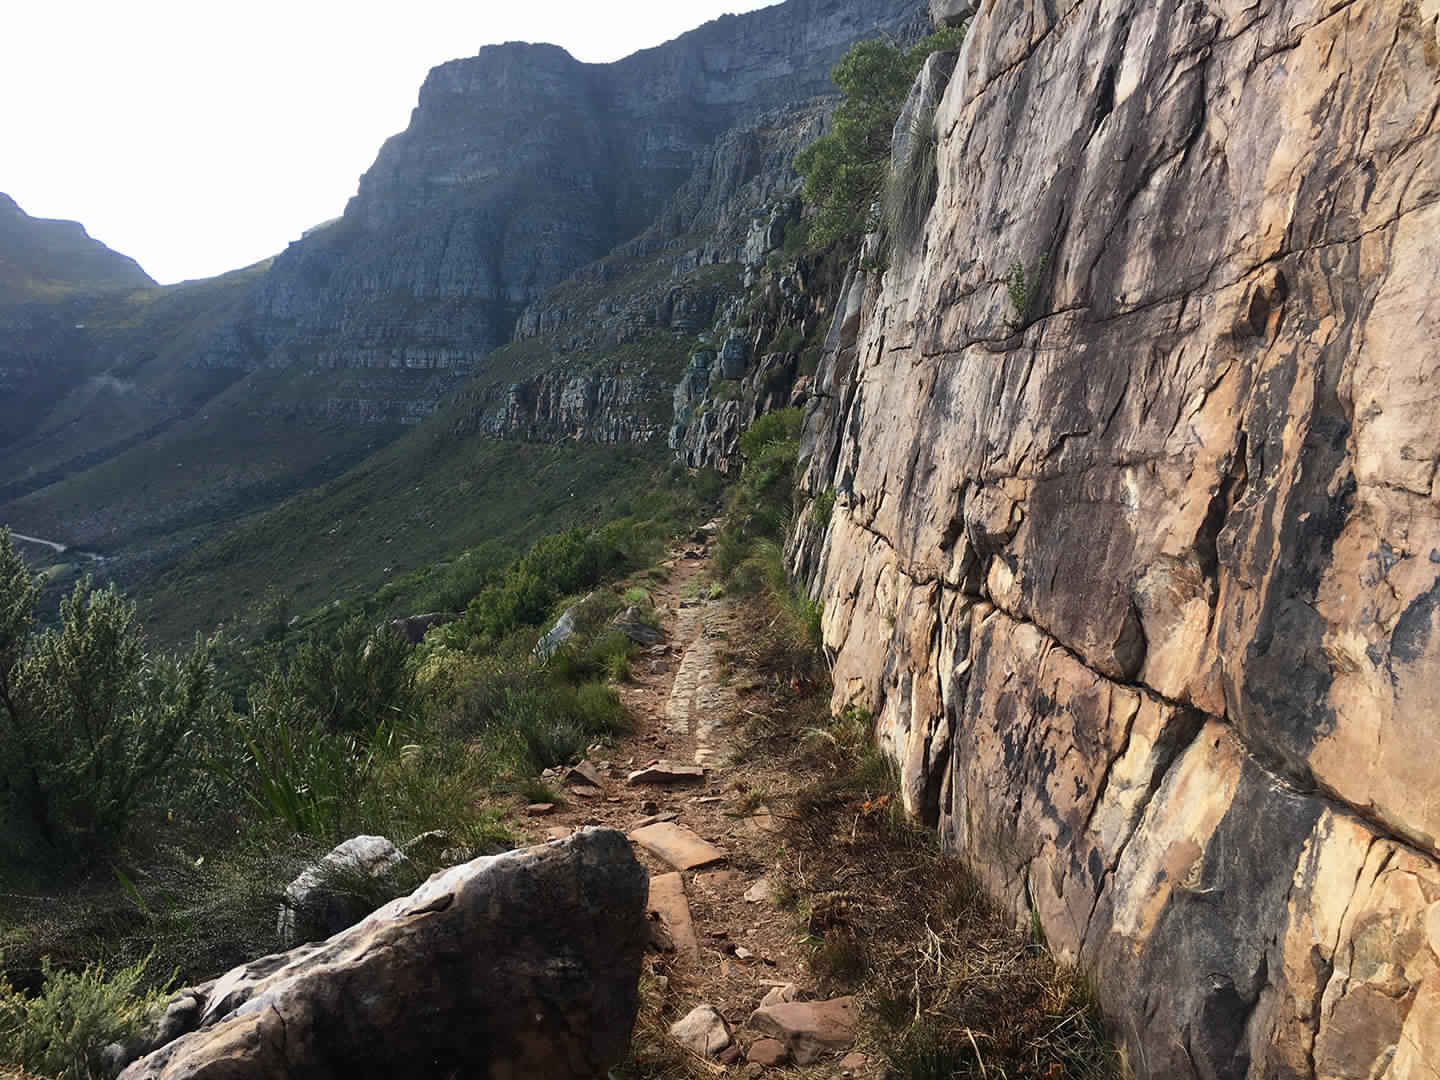 Platteklip Gorge hiking route on Table Mountain South Africa.